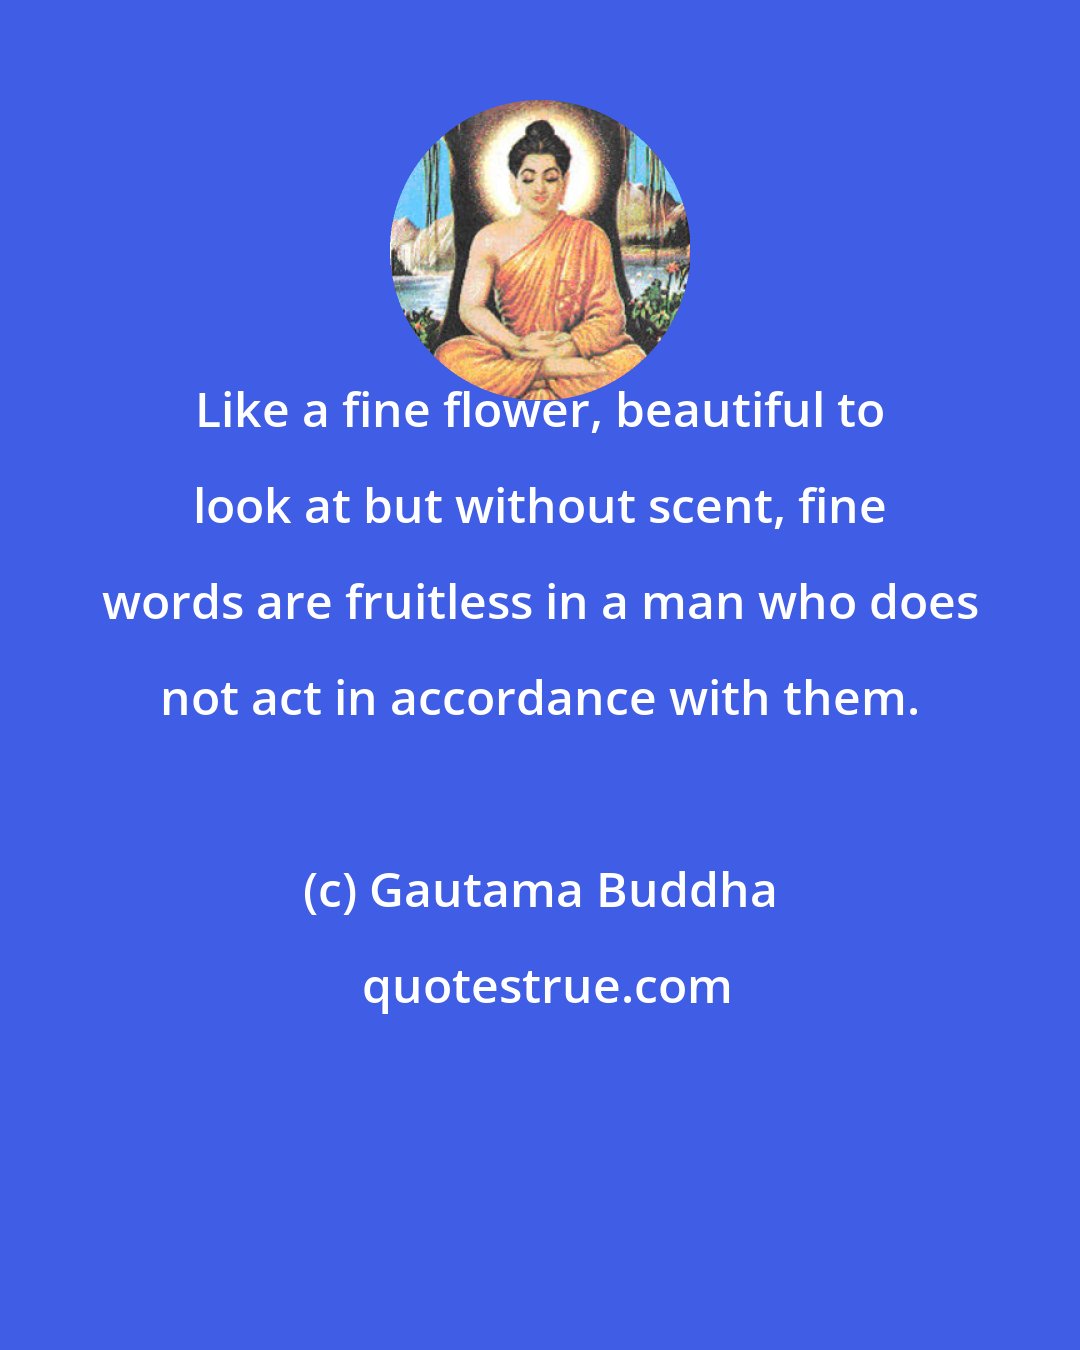 Gautama Buddha: Like a fine flower, beautiful to look at but without scent, fine words are fruitless in a man who does not act in accordance with them.